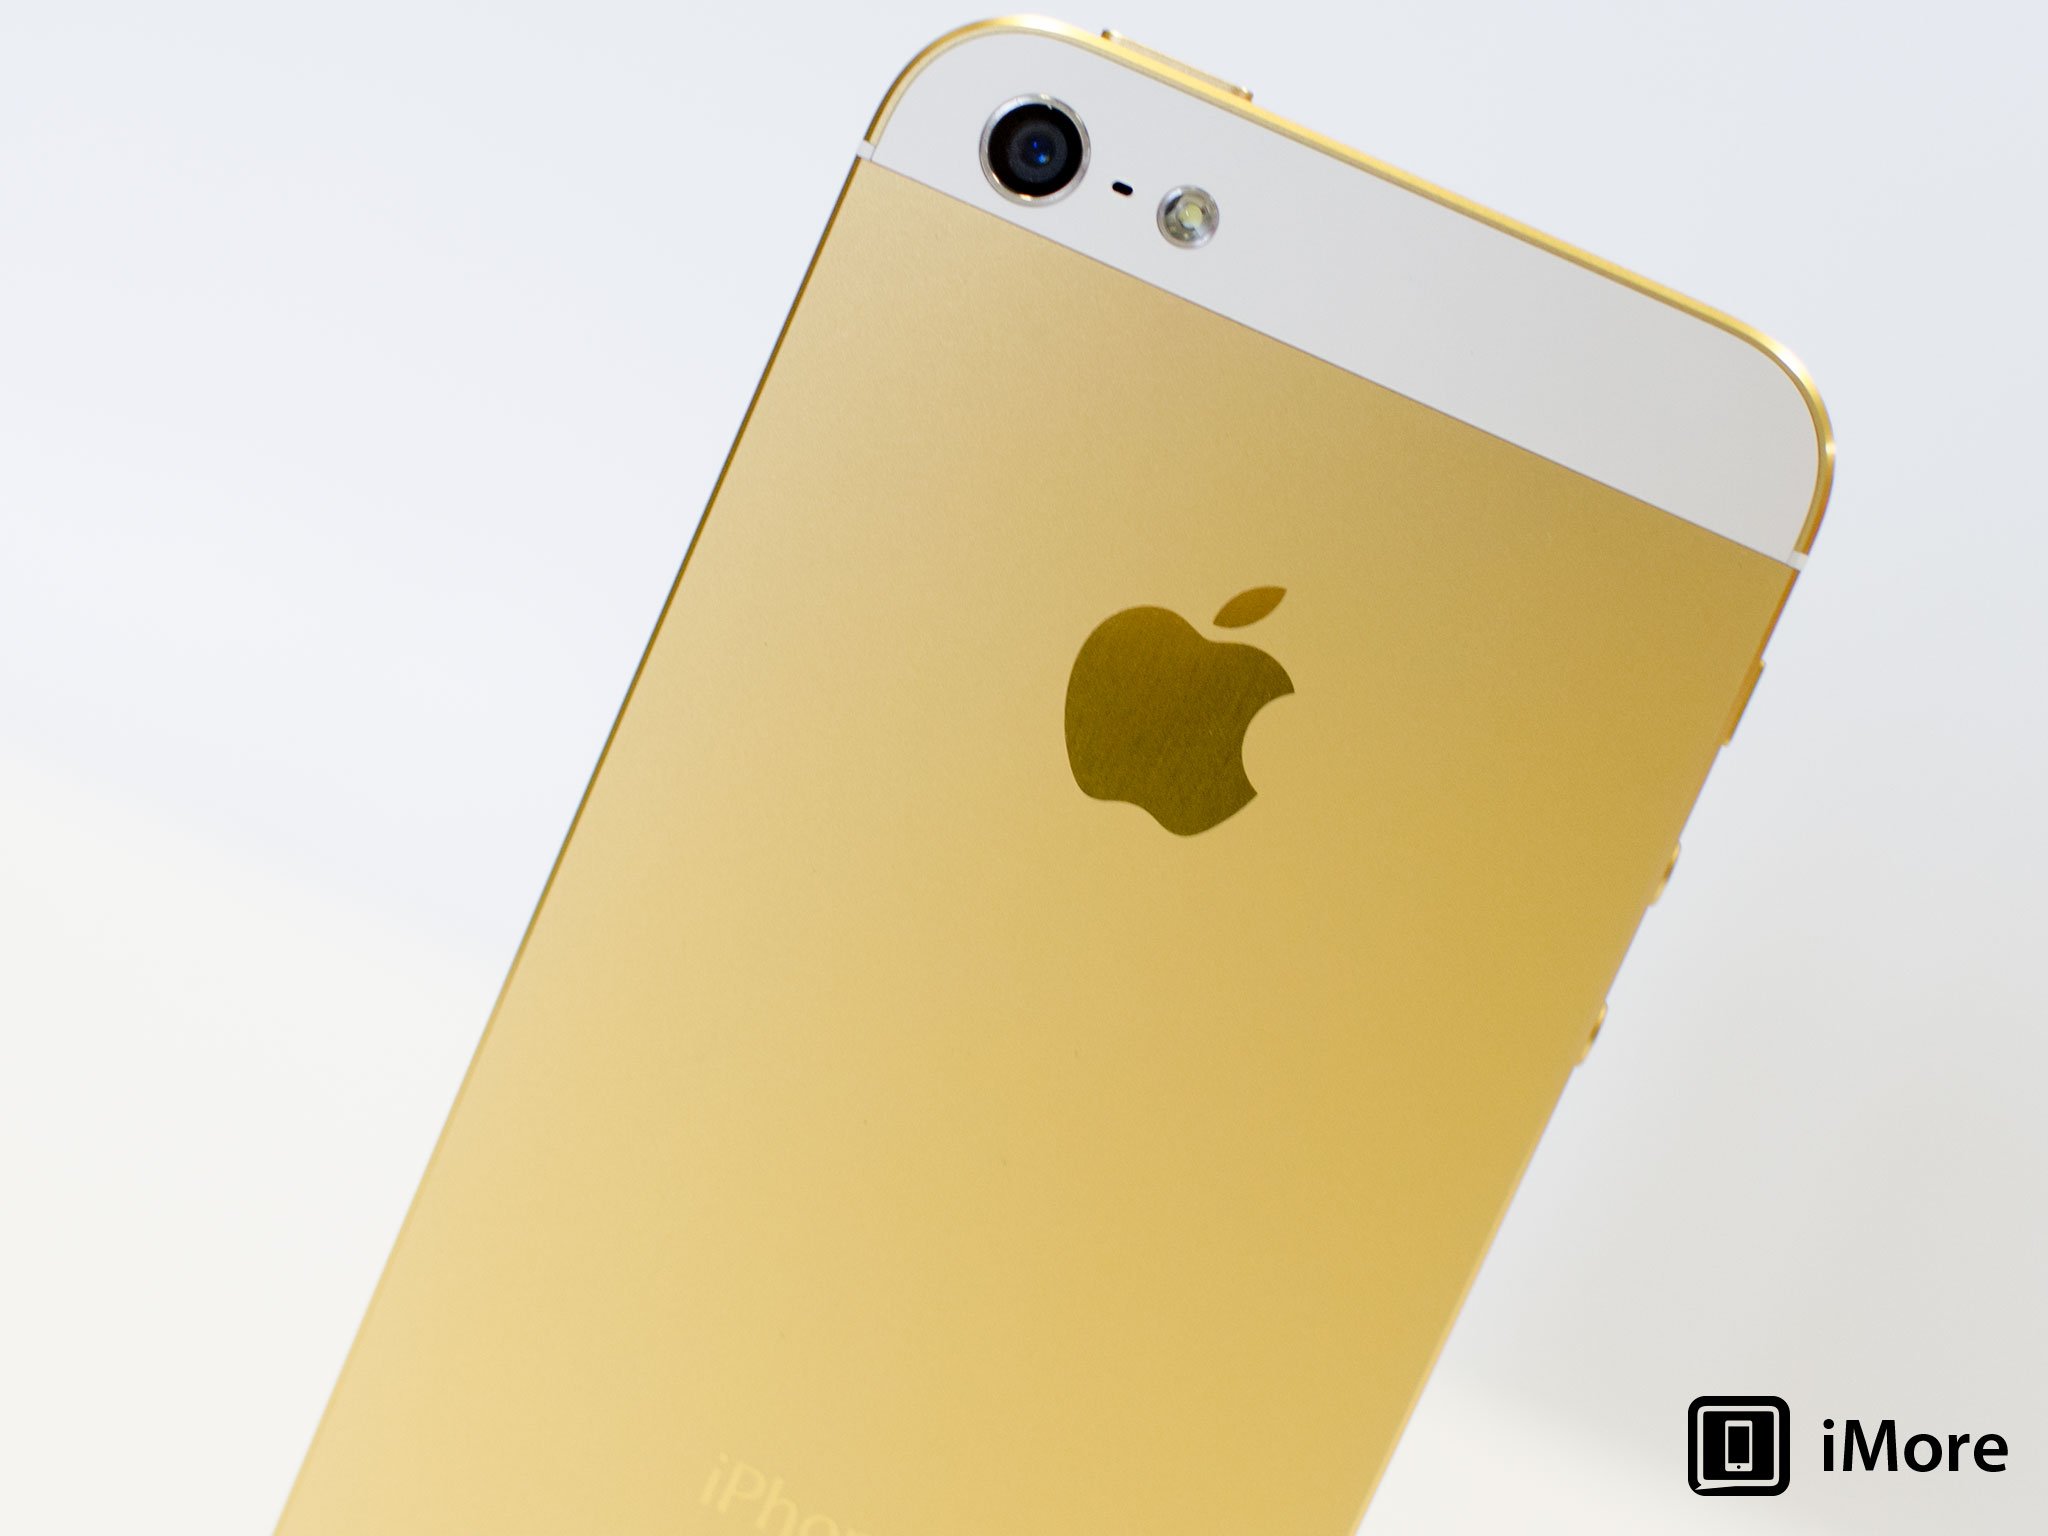 iPhone 5s reportedly twice as crash-prone